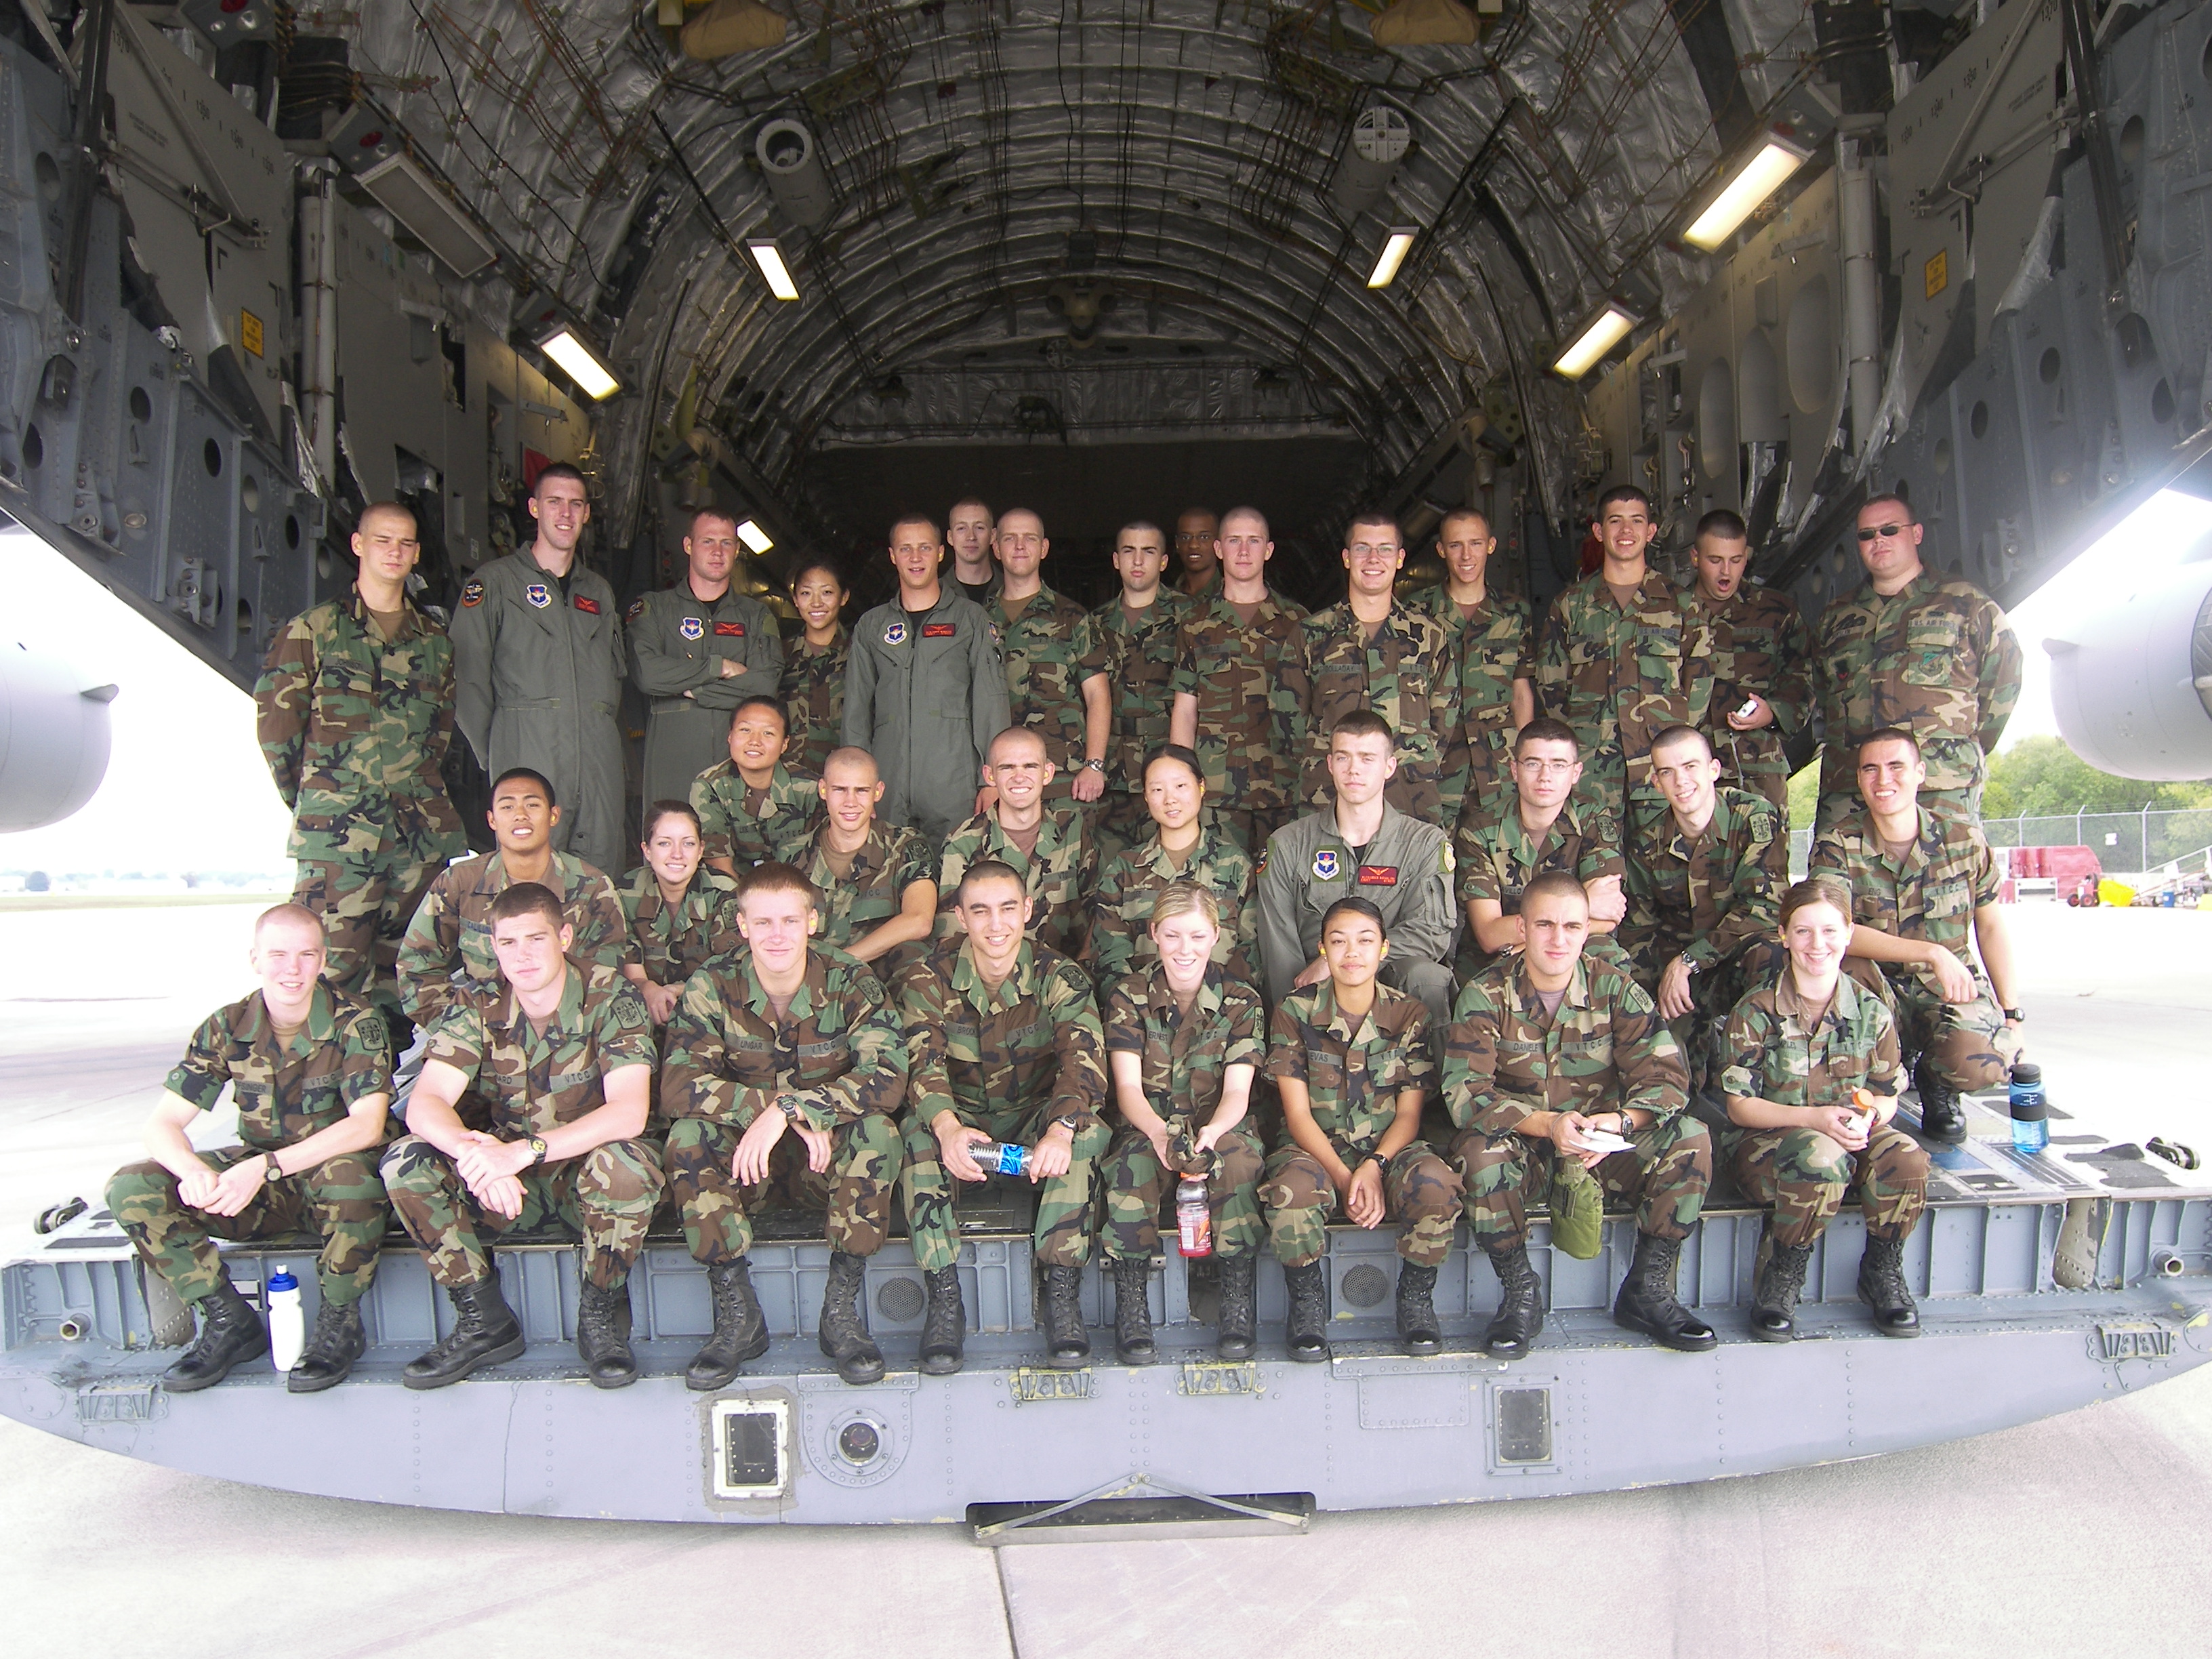 A previous orientation flight was given to a group of Virginia Tech cadets on a C-17 aircraft.